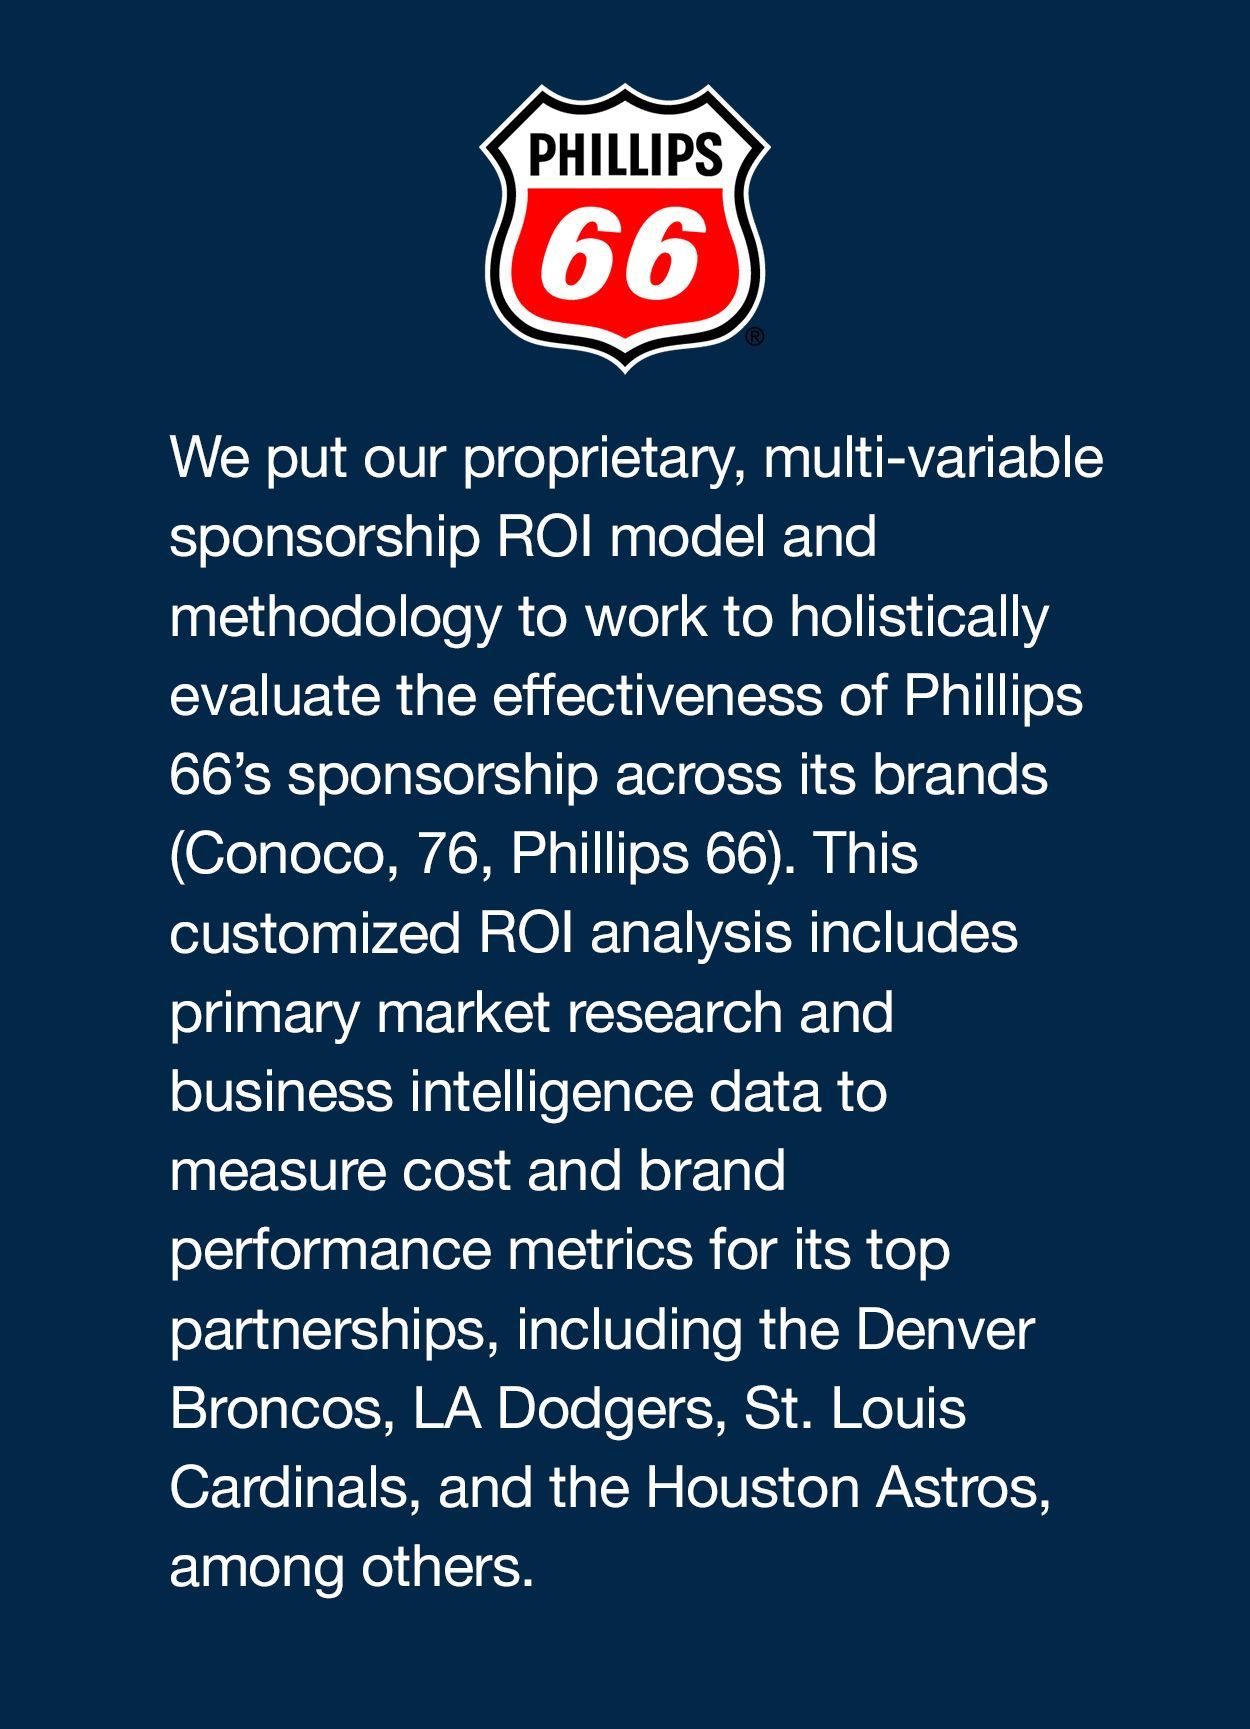 We put our proprietary, multi-variable sponsorship ROI model and methodology to work to holistically evaluate the effectiveness of Phillips 66’s sponsorship across its brands (Conoco, 76, Phillips 66). This customized ROI analysis includes primary market research and business intelligence data to measure cost and brand performance metrics for its top partnerships, including the Denver Broncos, LA Dodgers, St. Louis Cardinals, and the Houston Astros, among others.